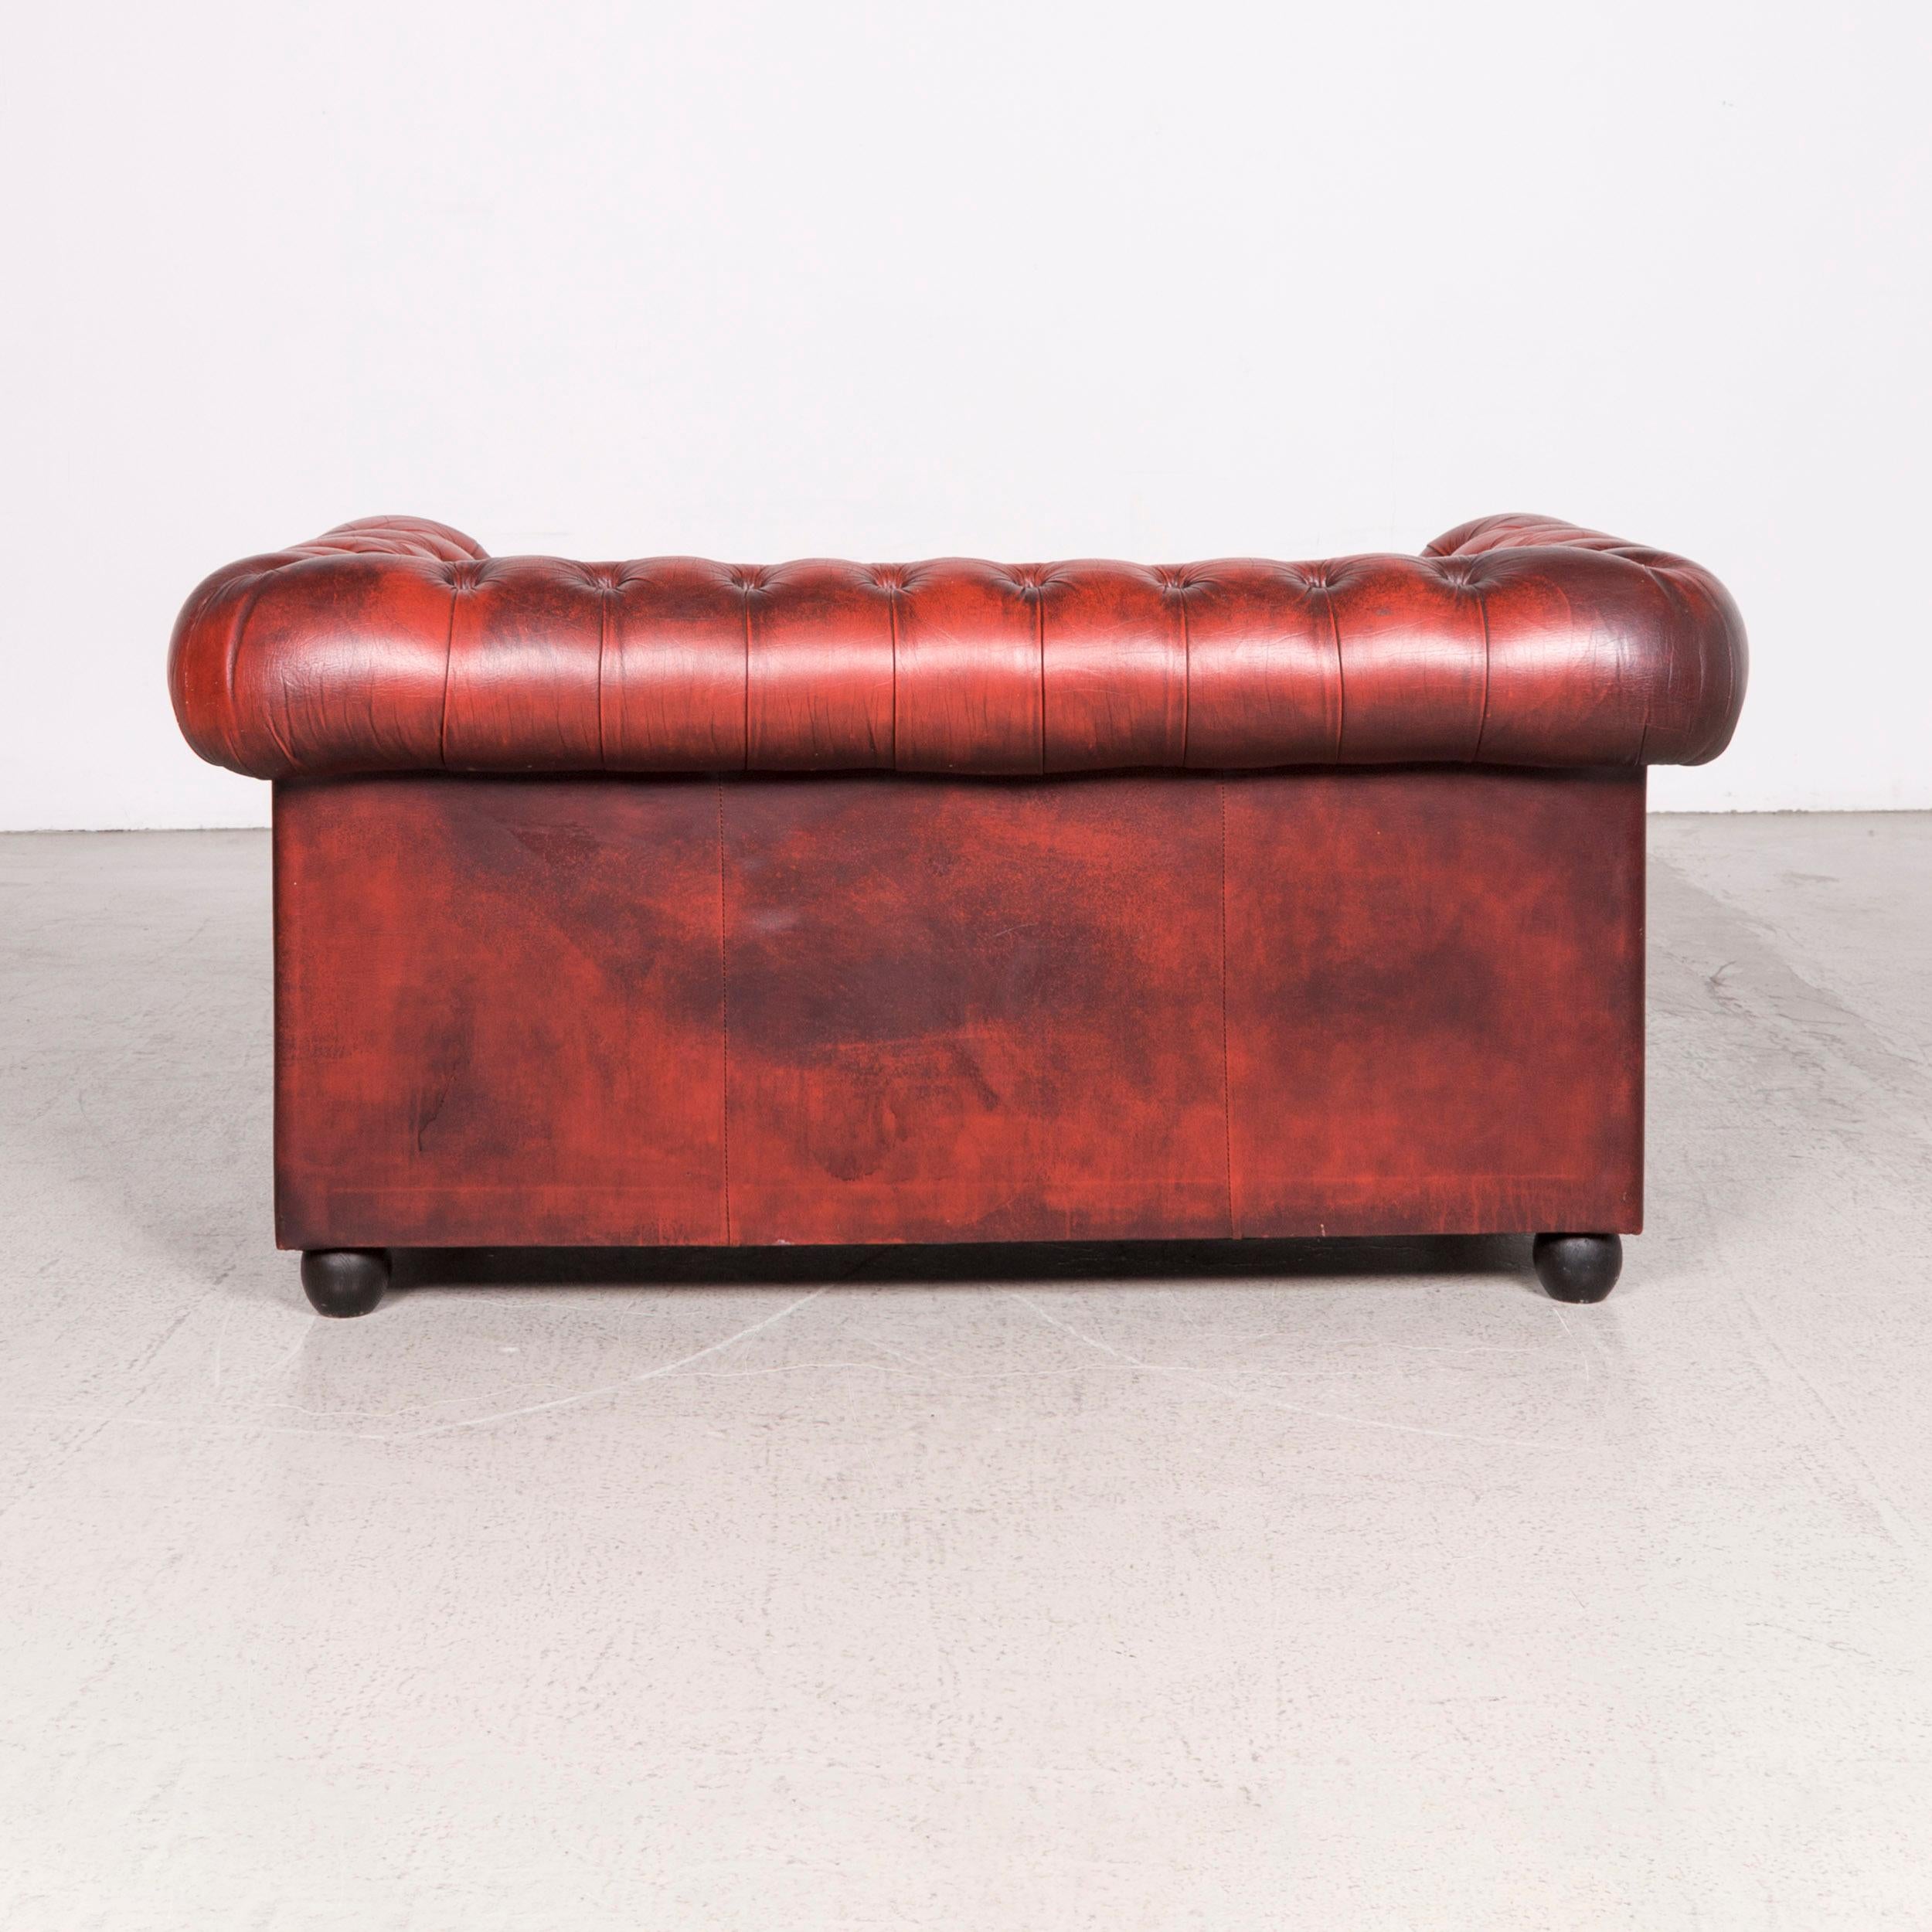 Contemporary Chesterfield Designer Leather Sofa Red Two-Seat Genuine Leather Vintage Retro For Sale